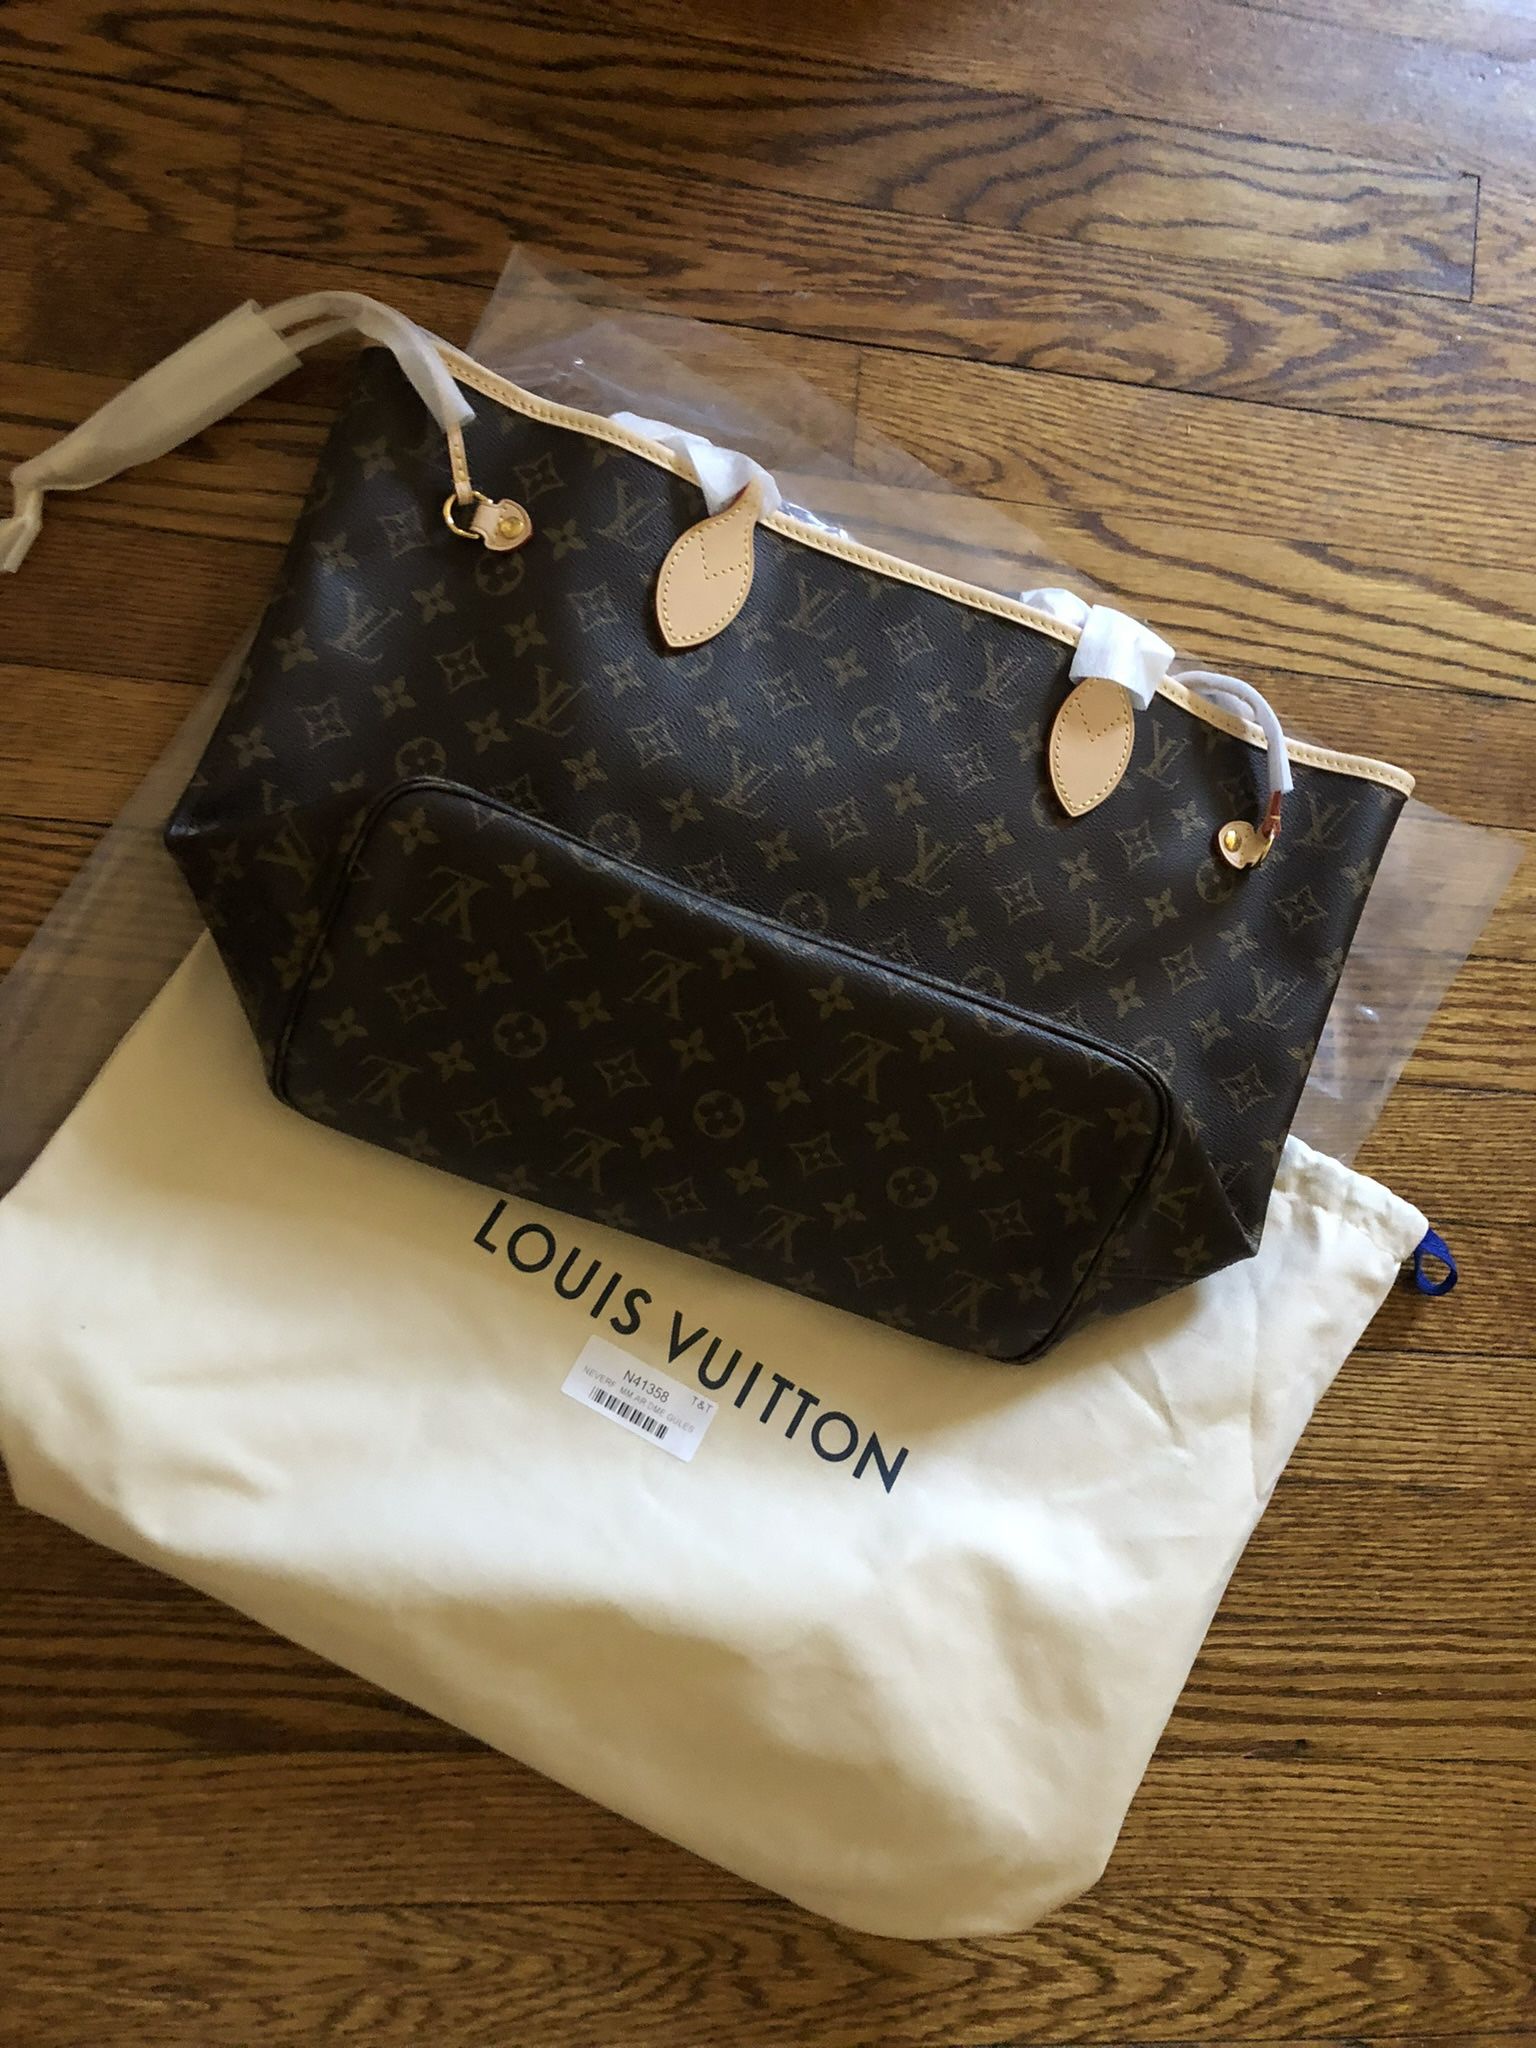 Dupe Bag L. V. Coussin for Sale in Corona, CA - OfferUp